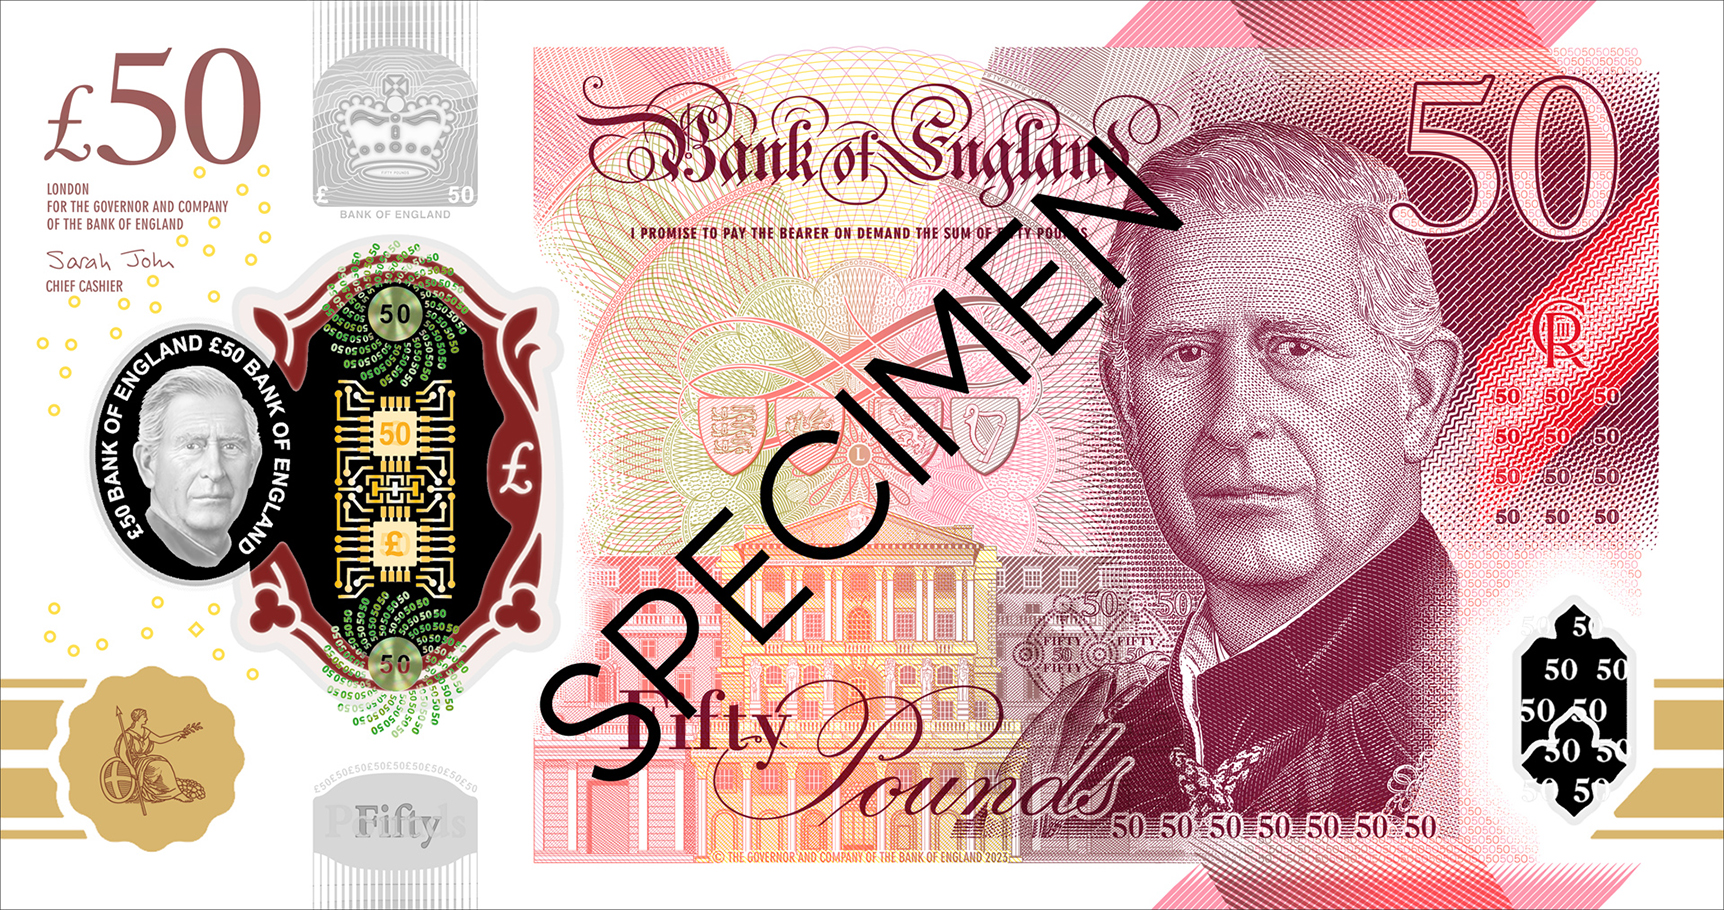 United Kingdom new 50pound note (B210a) reported for introduction mid